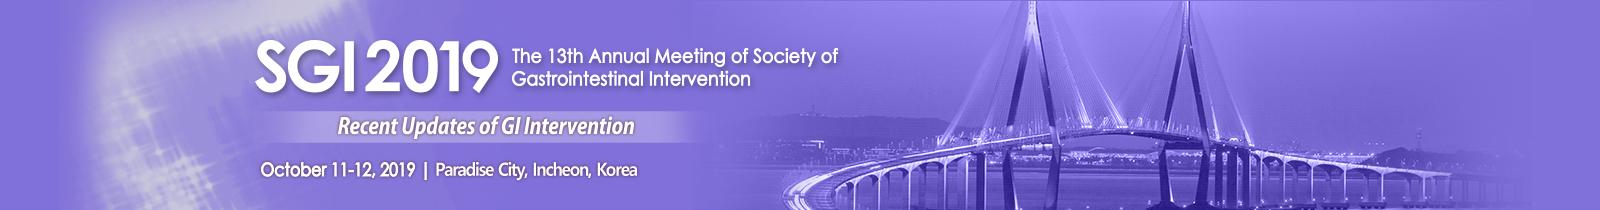 SGI 2019 The 11th Annual Meeting of Society of Gastrointestinal Intervention